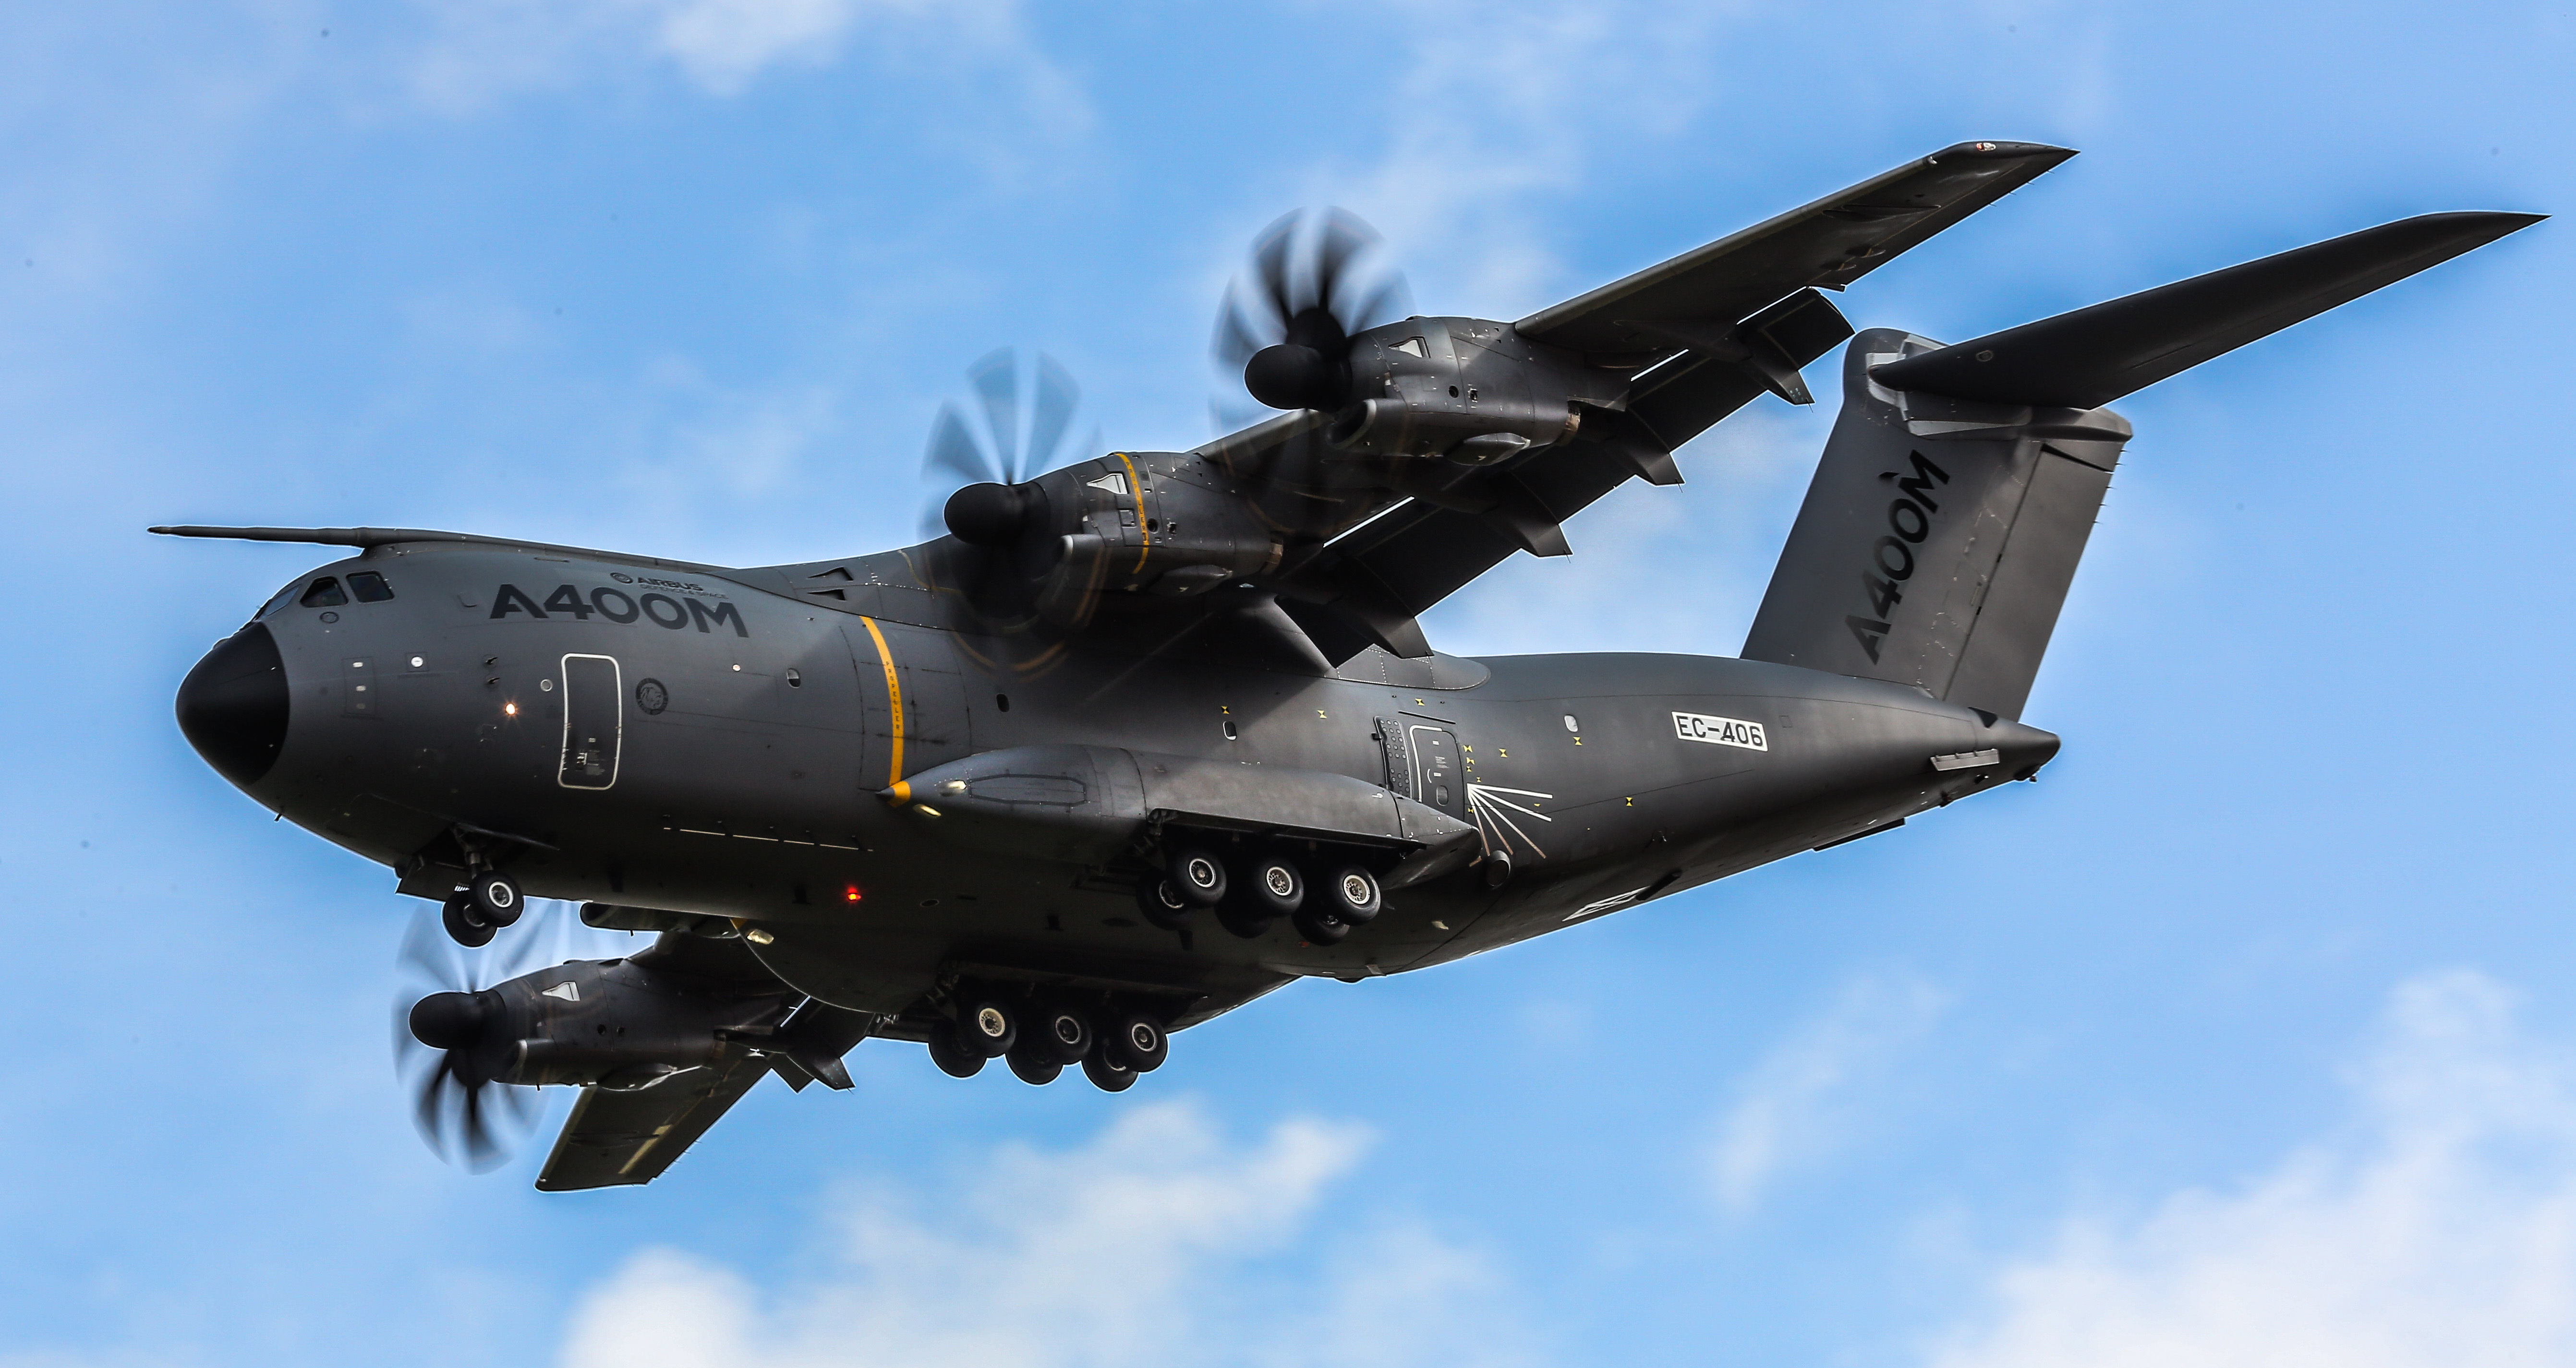 Airbus A400M Airbus Transport Aircraft Airplane 5365x2850